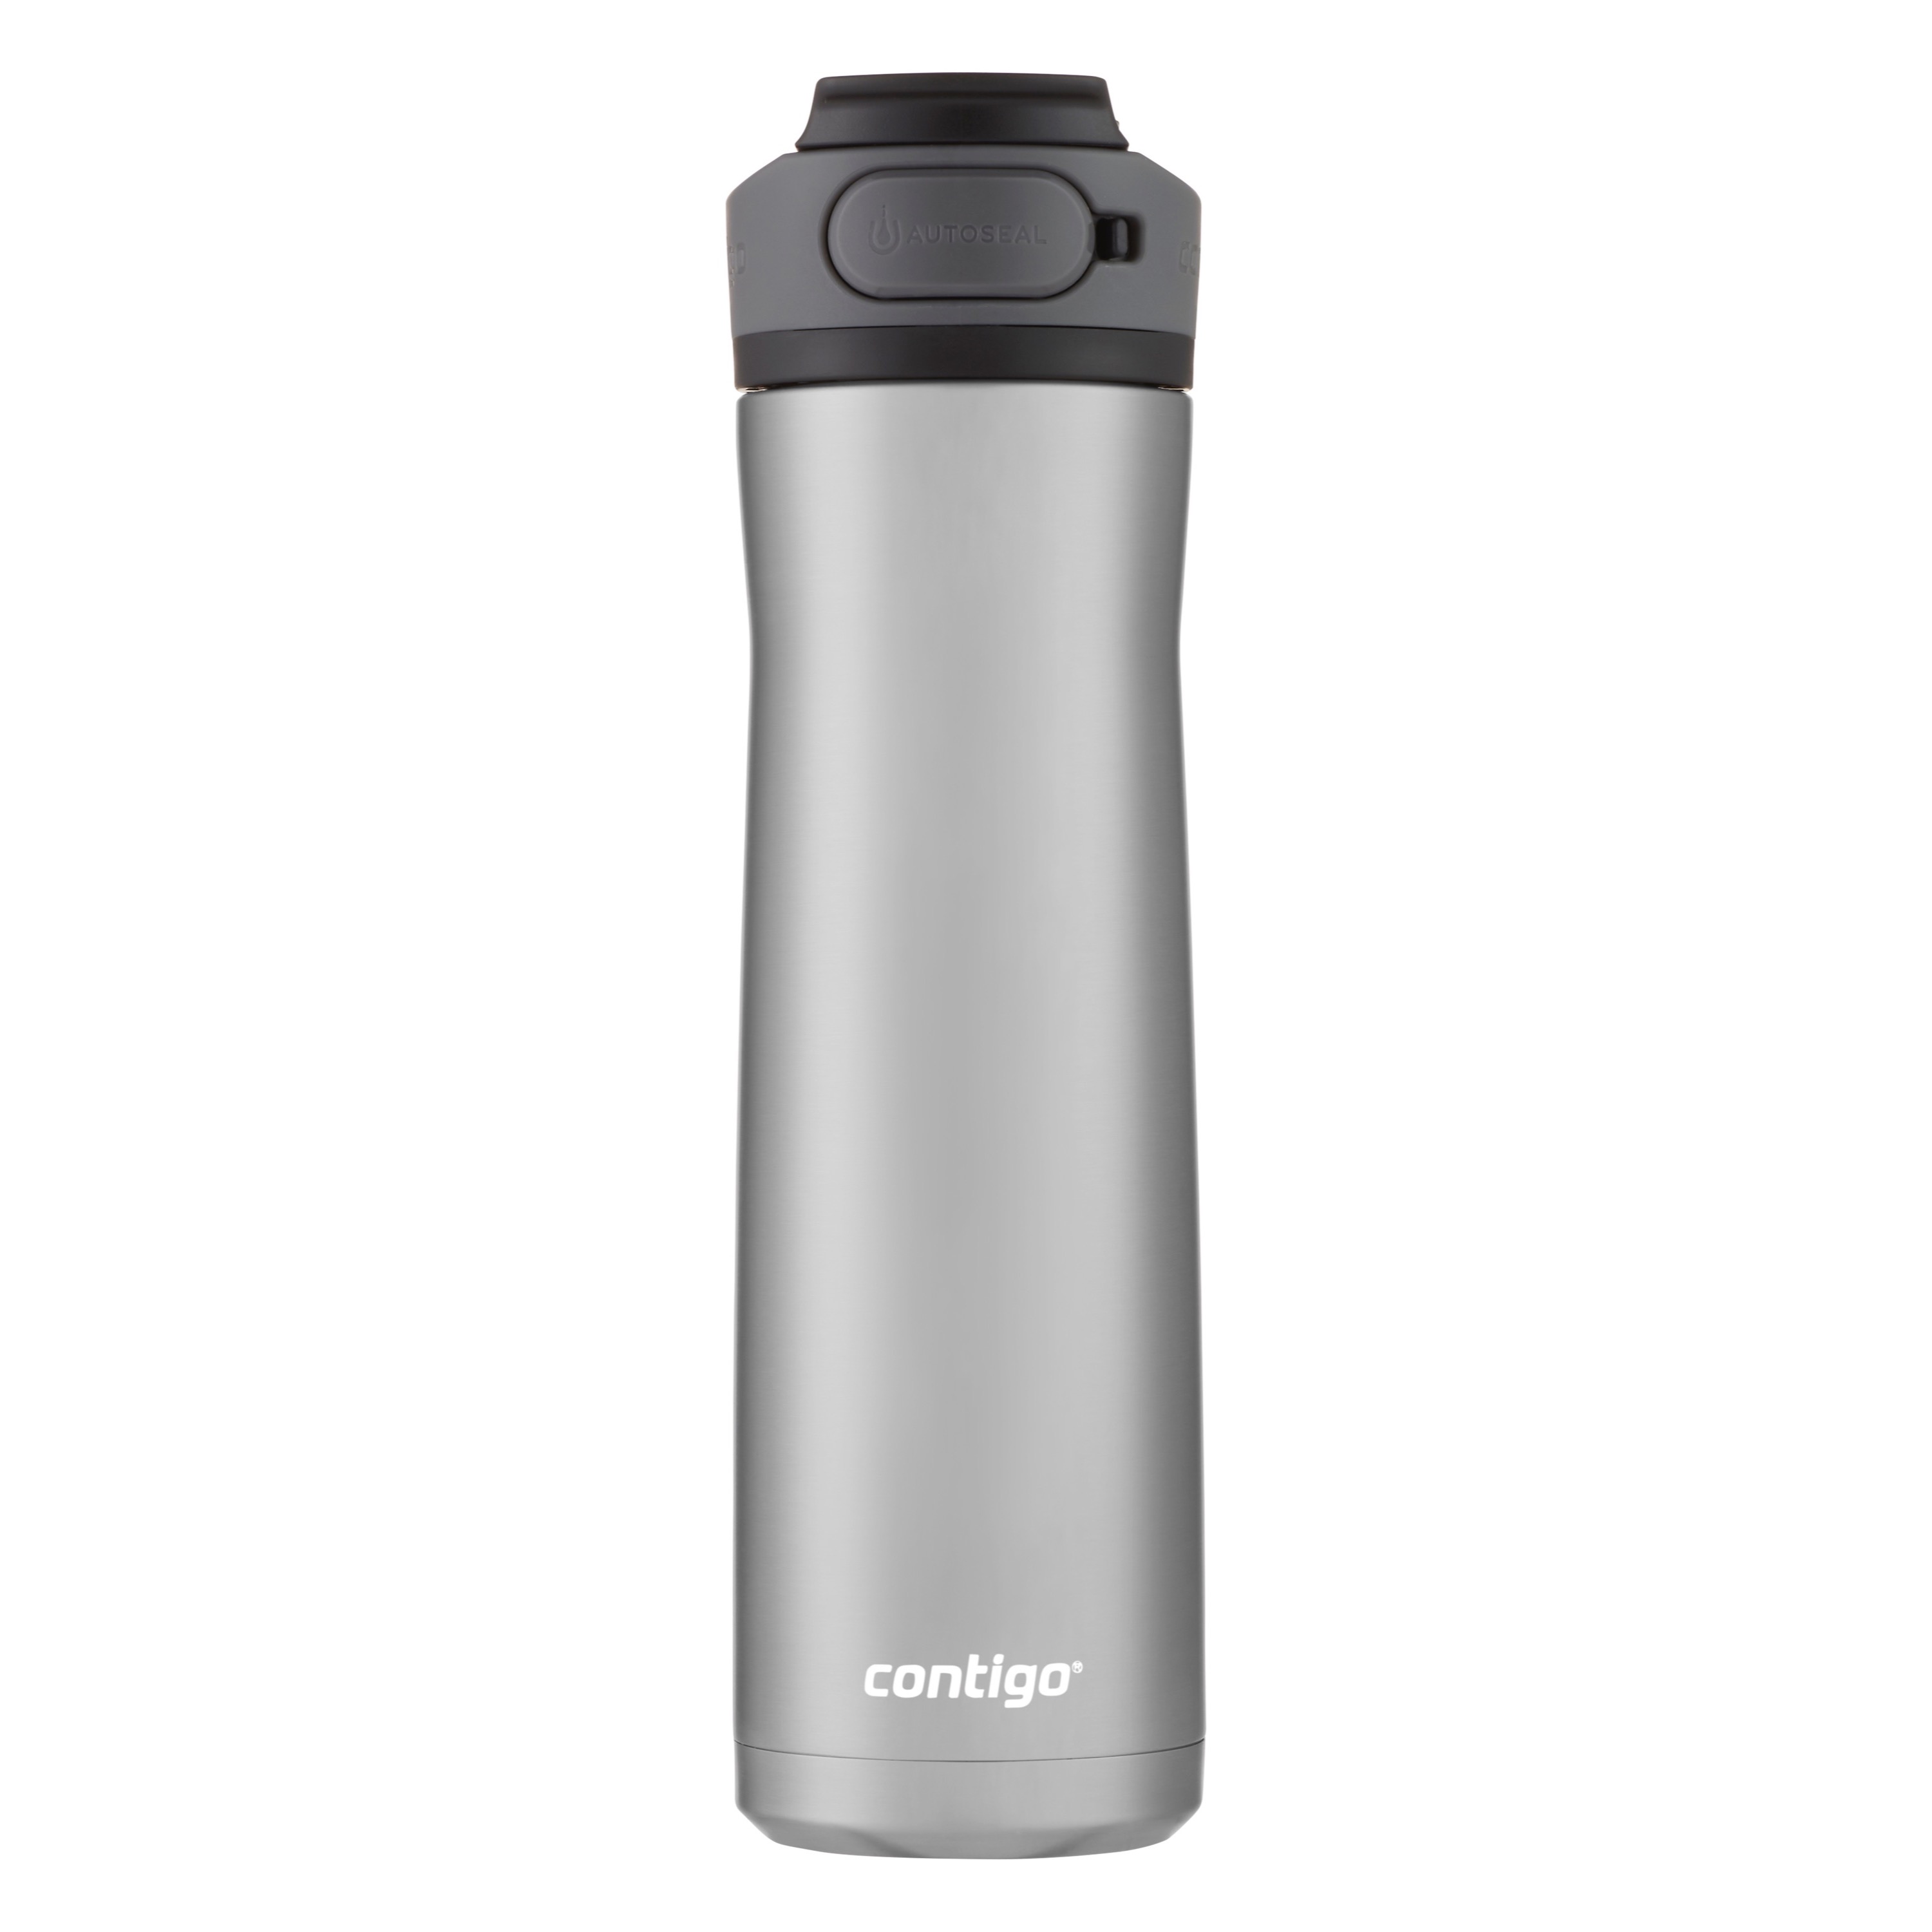 Contigo Cortland Chill 2.0 24 oz Silver, Gray and Licorice Solid Print Double Wall Vacuum Insulated Stainless Steel Water Bottle with Wide Mouth Lid - image 7 of 9